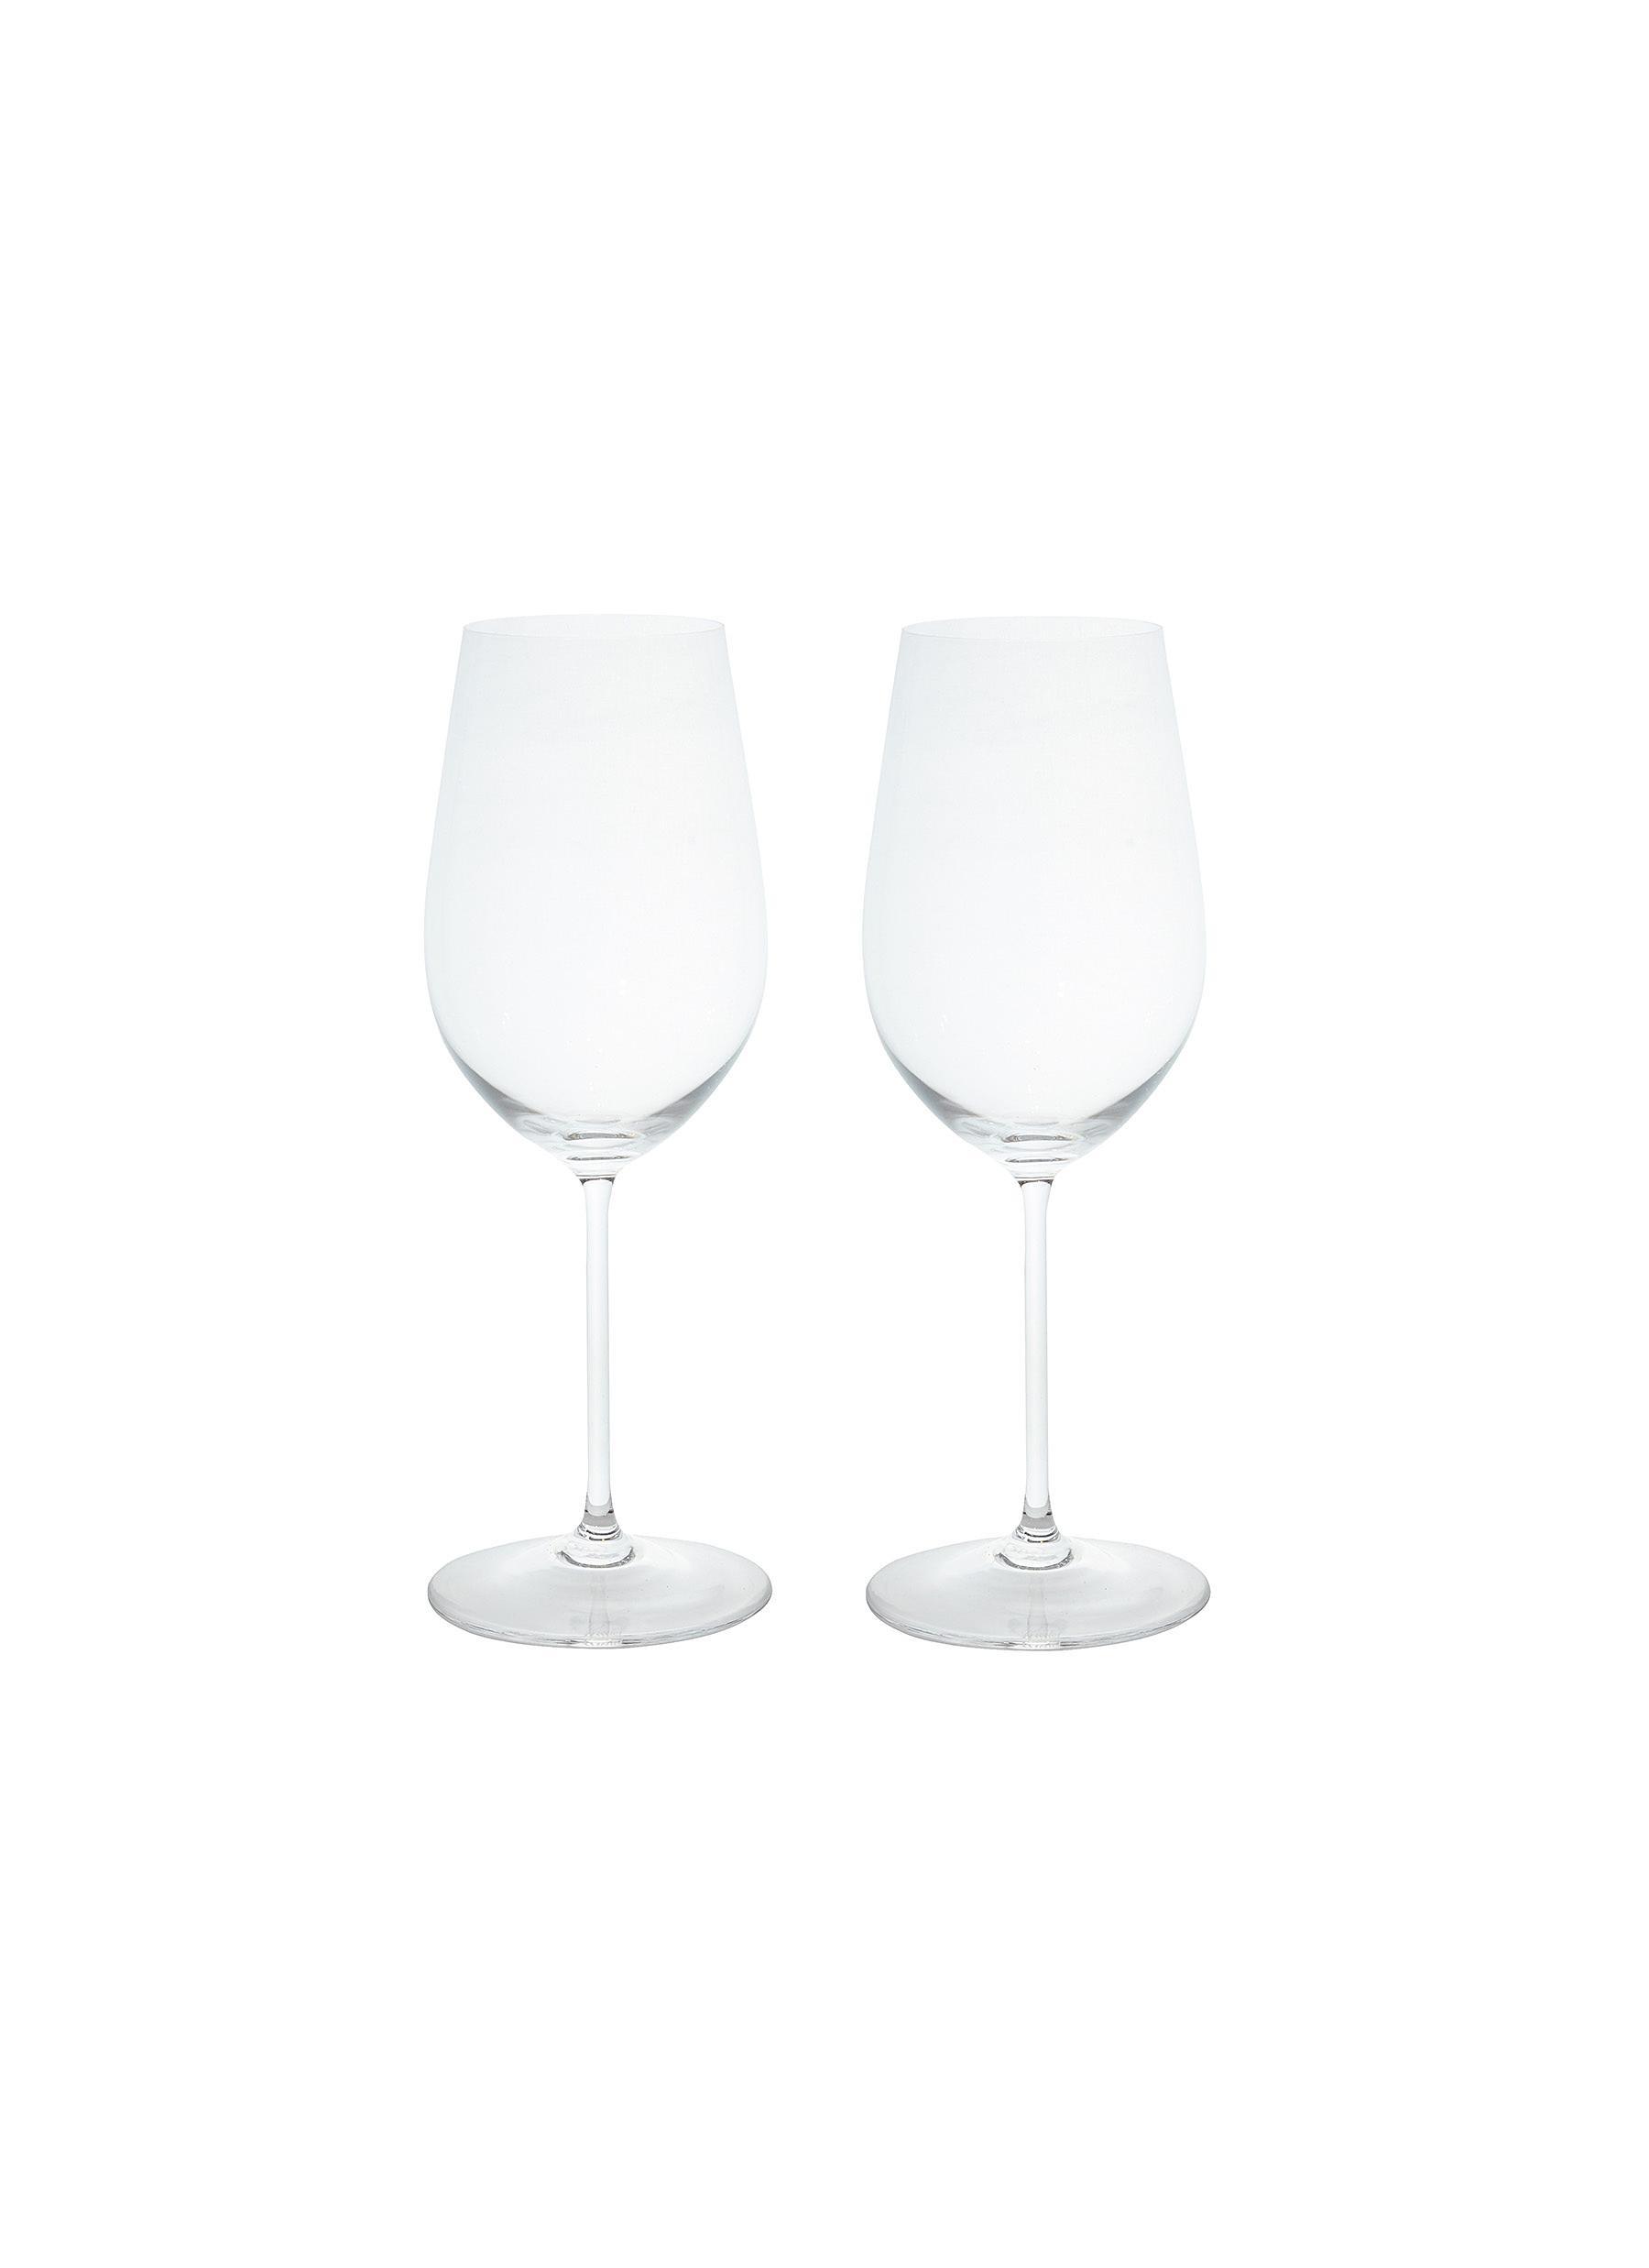 Riedel 265 Years Anniversary Sommeliers Mature Riesling Grand Cru/Zinfandel Glass - Set of 2